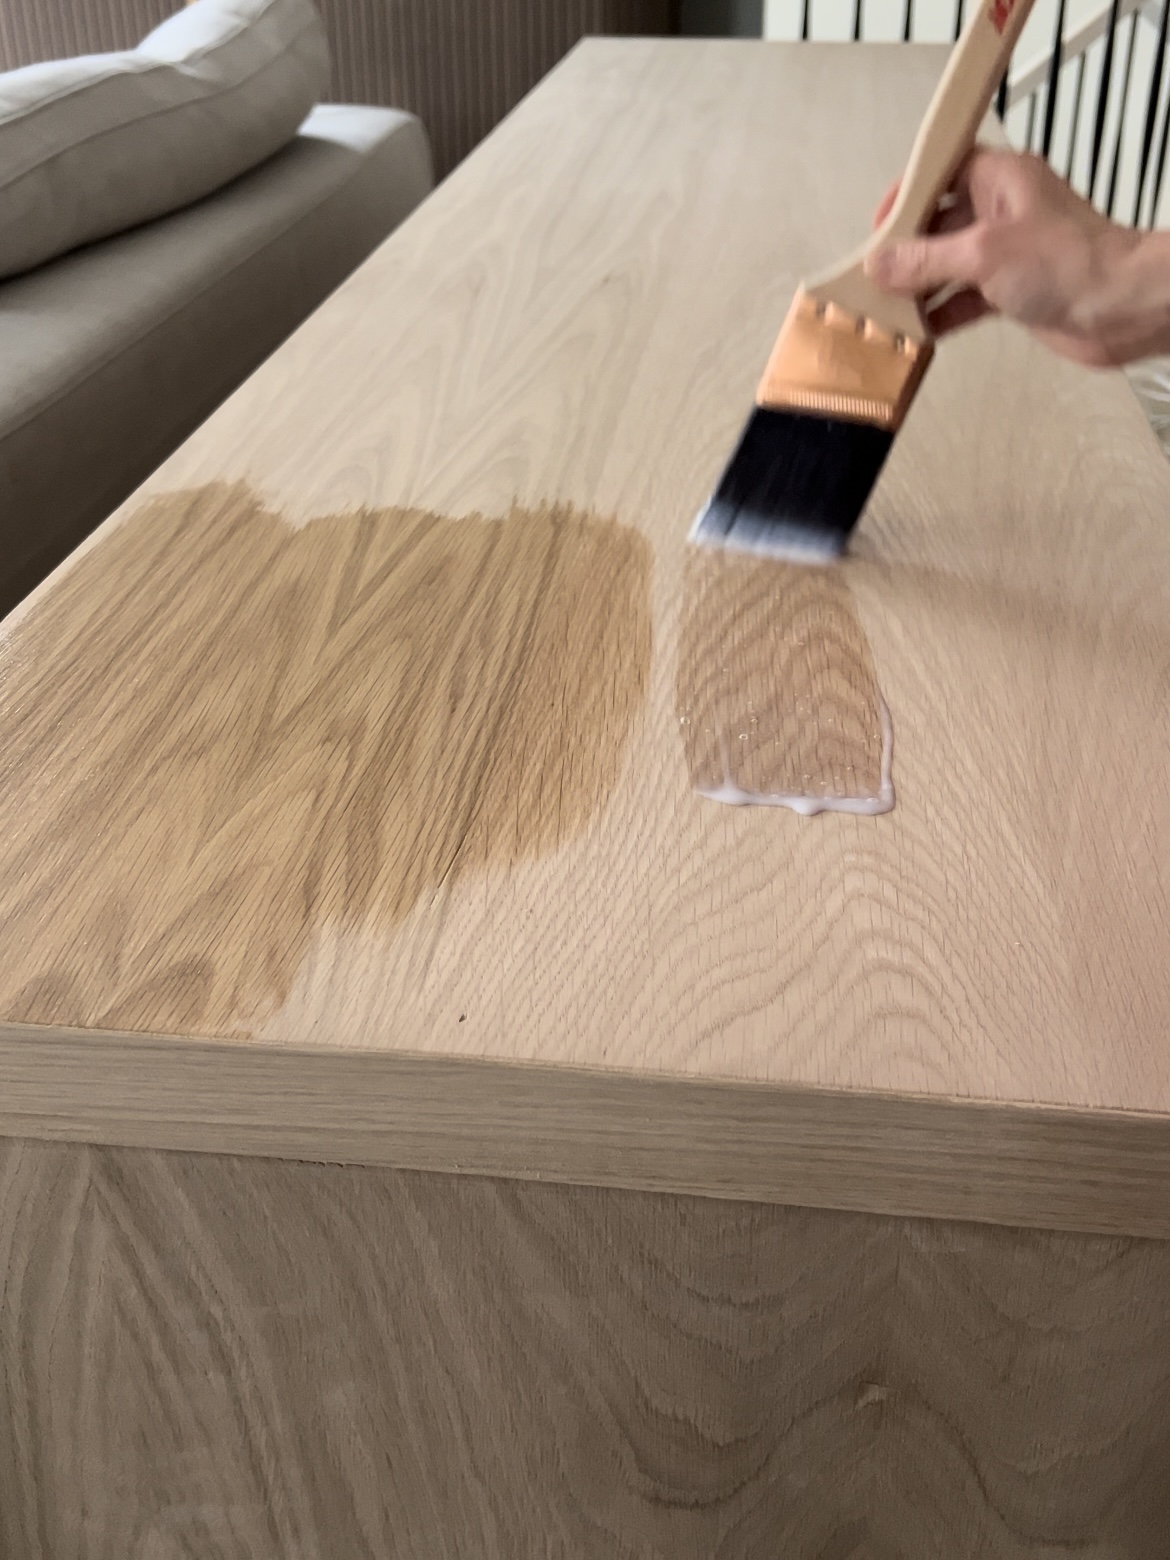 Brushing sealer on top of the diy sofa table with storage.